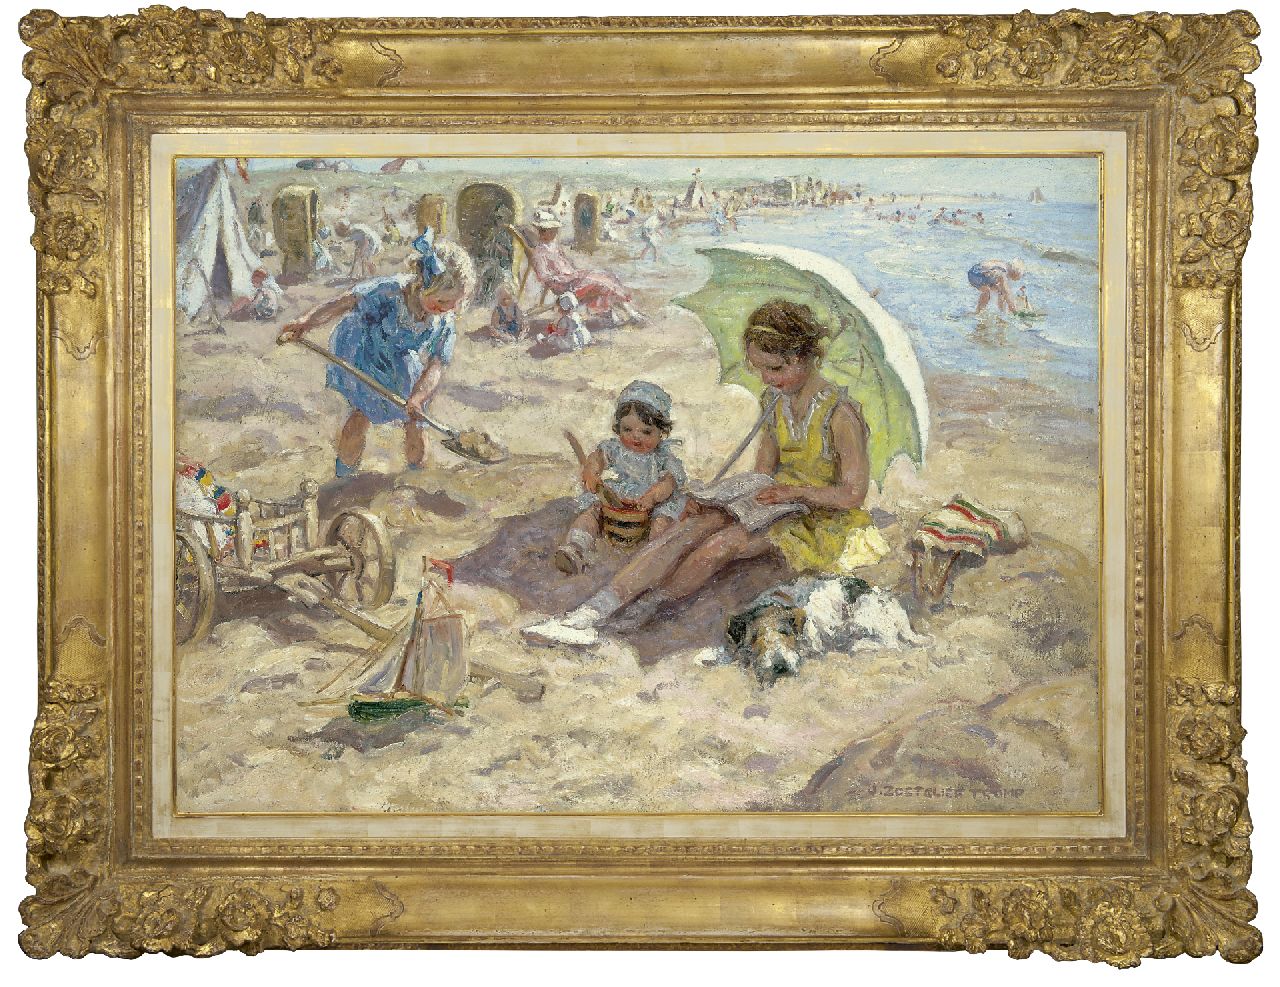 Zoetelief Tromp J.  | Johannes 'Jan' Zoetelief Tromp | Paintings offered for sale | Children playing on the beach of Katwijk, oil on canvas 68.3 x 95.9 cm, signed l.r. and on the reverse